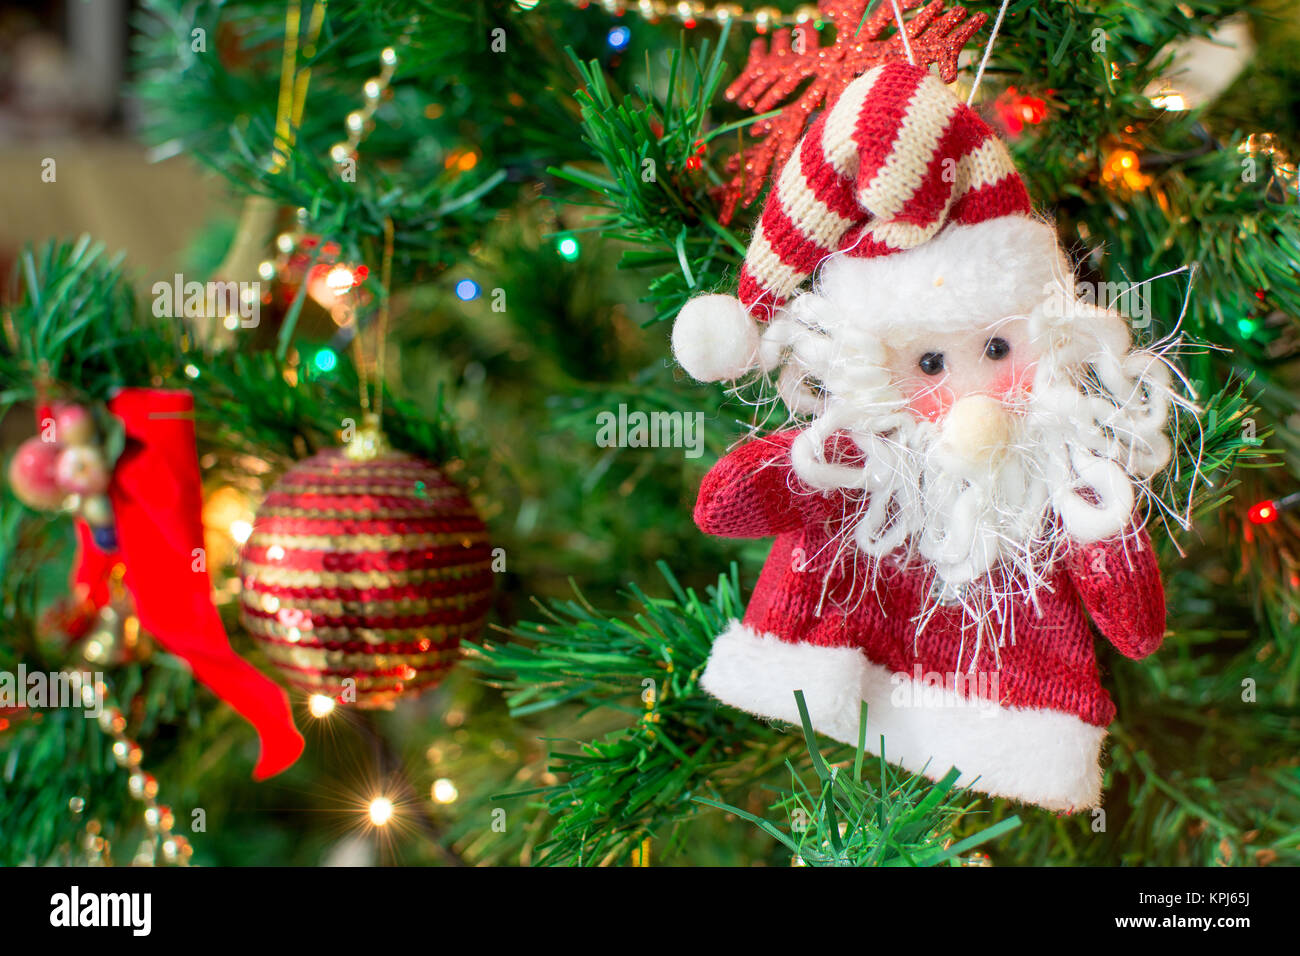 Jingle bell, Christmas tree branches with blurred background. Stock Photo